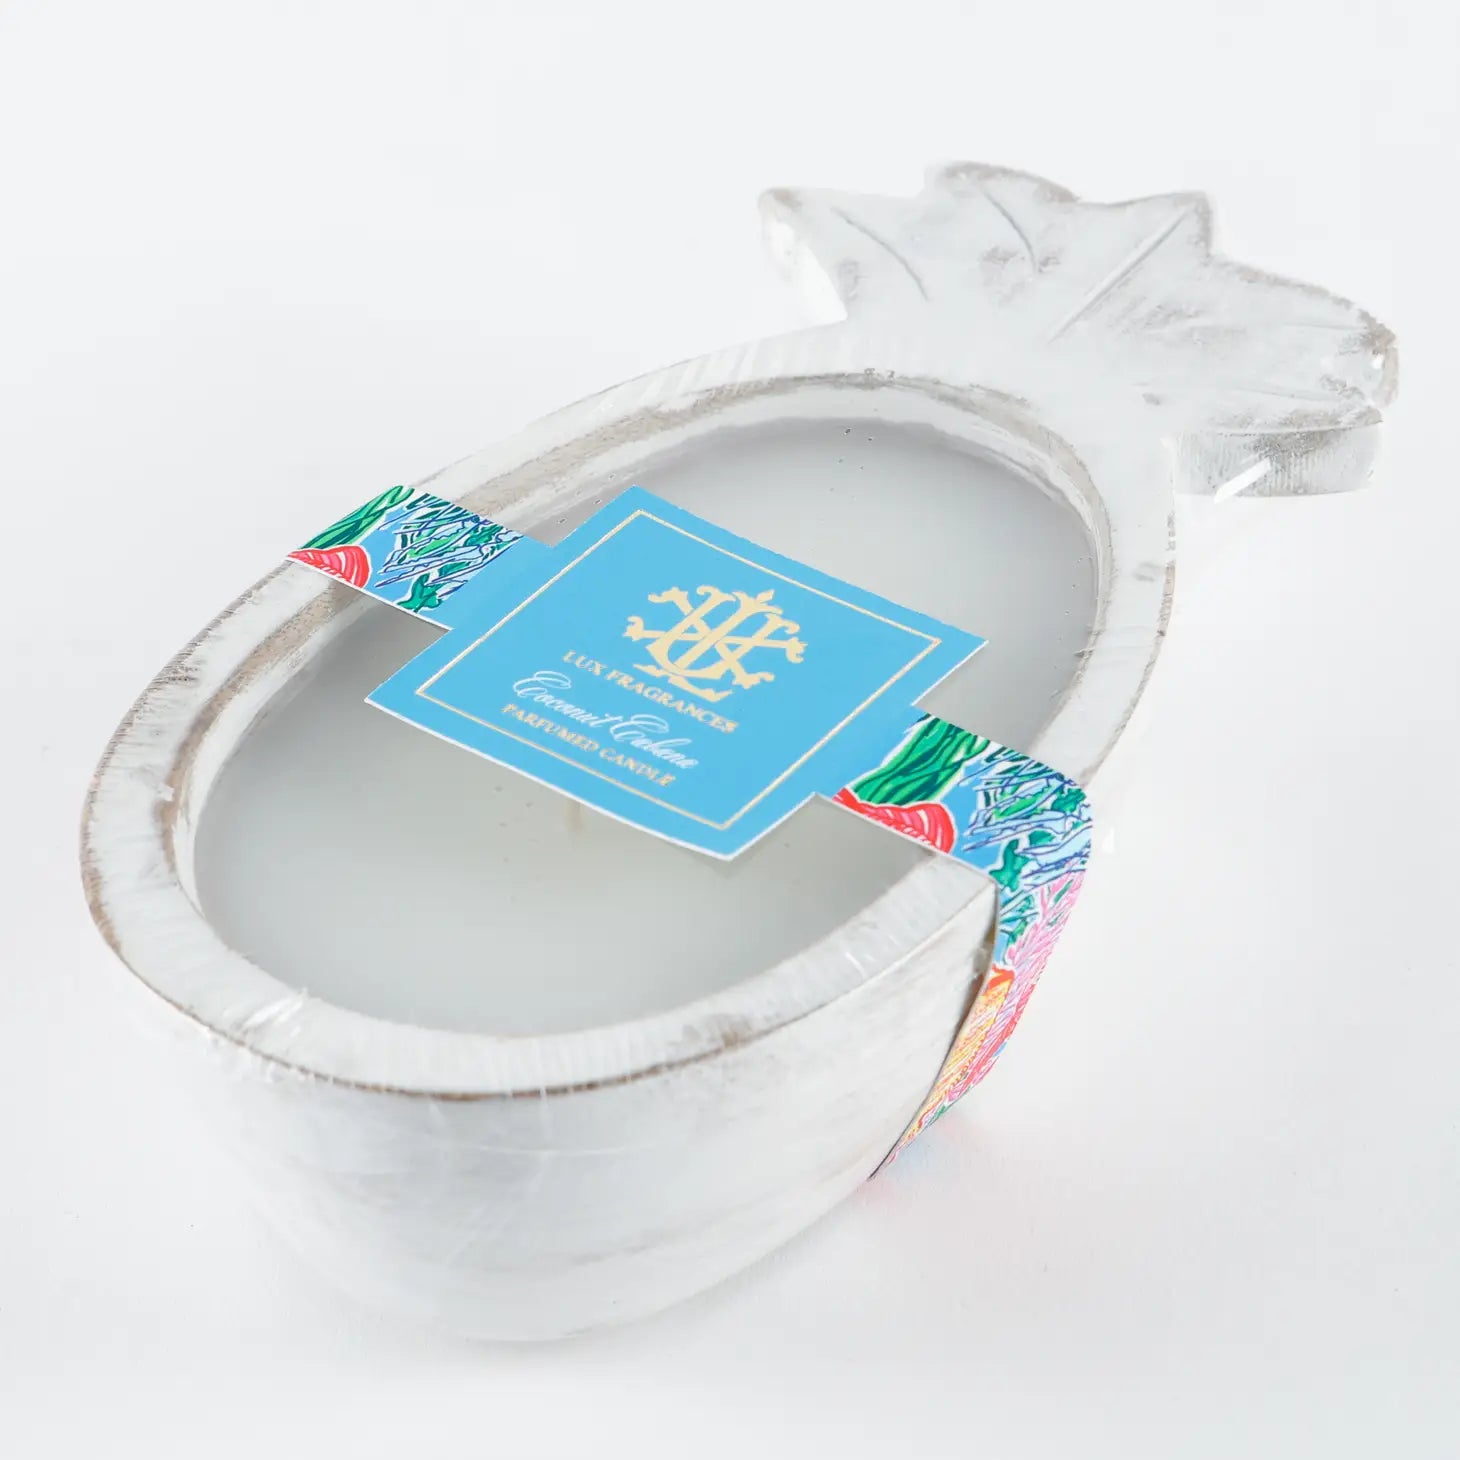 Lux Fragrances Coconut Cabana Whitewashed Pineapple Bowl available at The Good Life Boutique